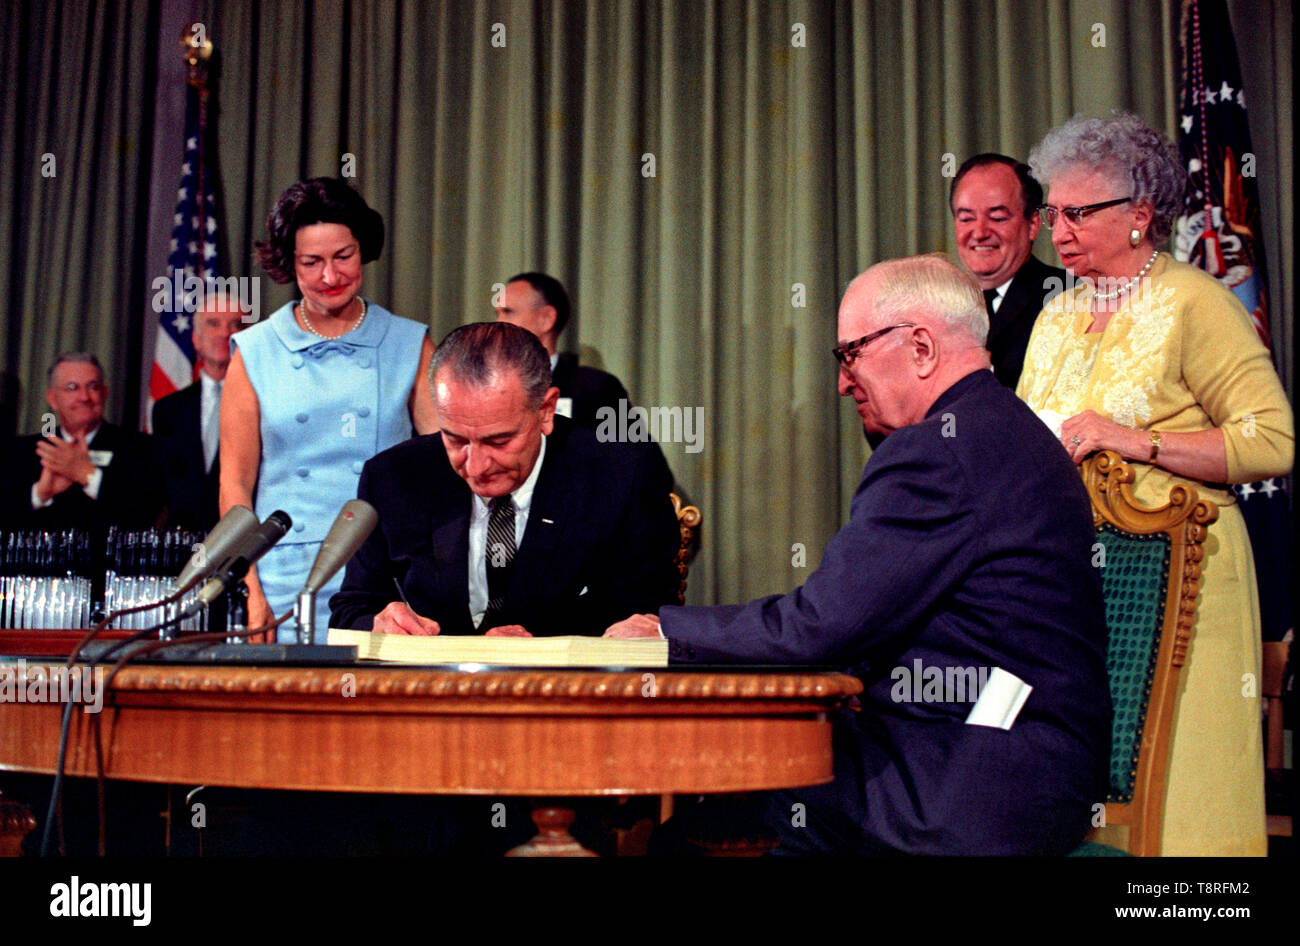 President Lyndon B. Johnson signing the Medicare Bill at the Harry S. Truman Library in Independence, Missouri. Former president Harry S. Truman is seated at the table with President Johnson. The following are in the background (from left to right): Senator Edward V. Long, an unidentified man, Lady Bird Johnson, Senator Mike Mansfield, Vice President Hubert Humphrey, and Bess Truman. July 30,1965 Stock Photo